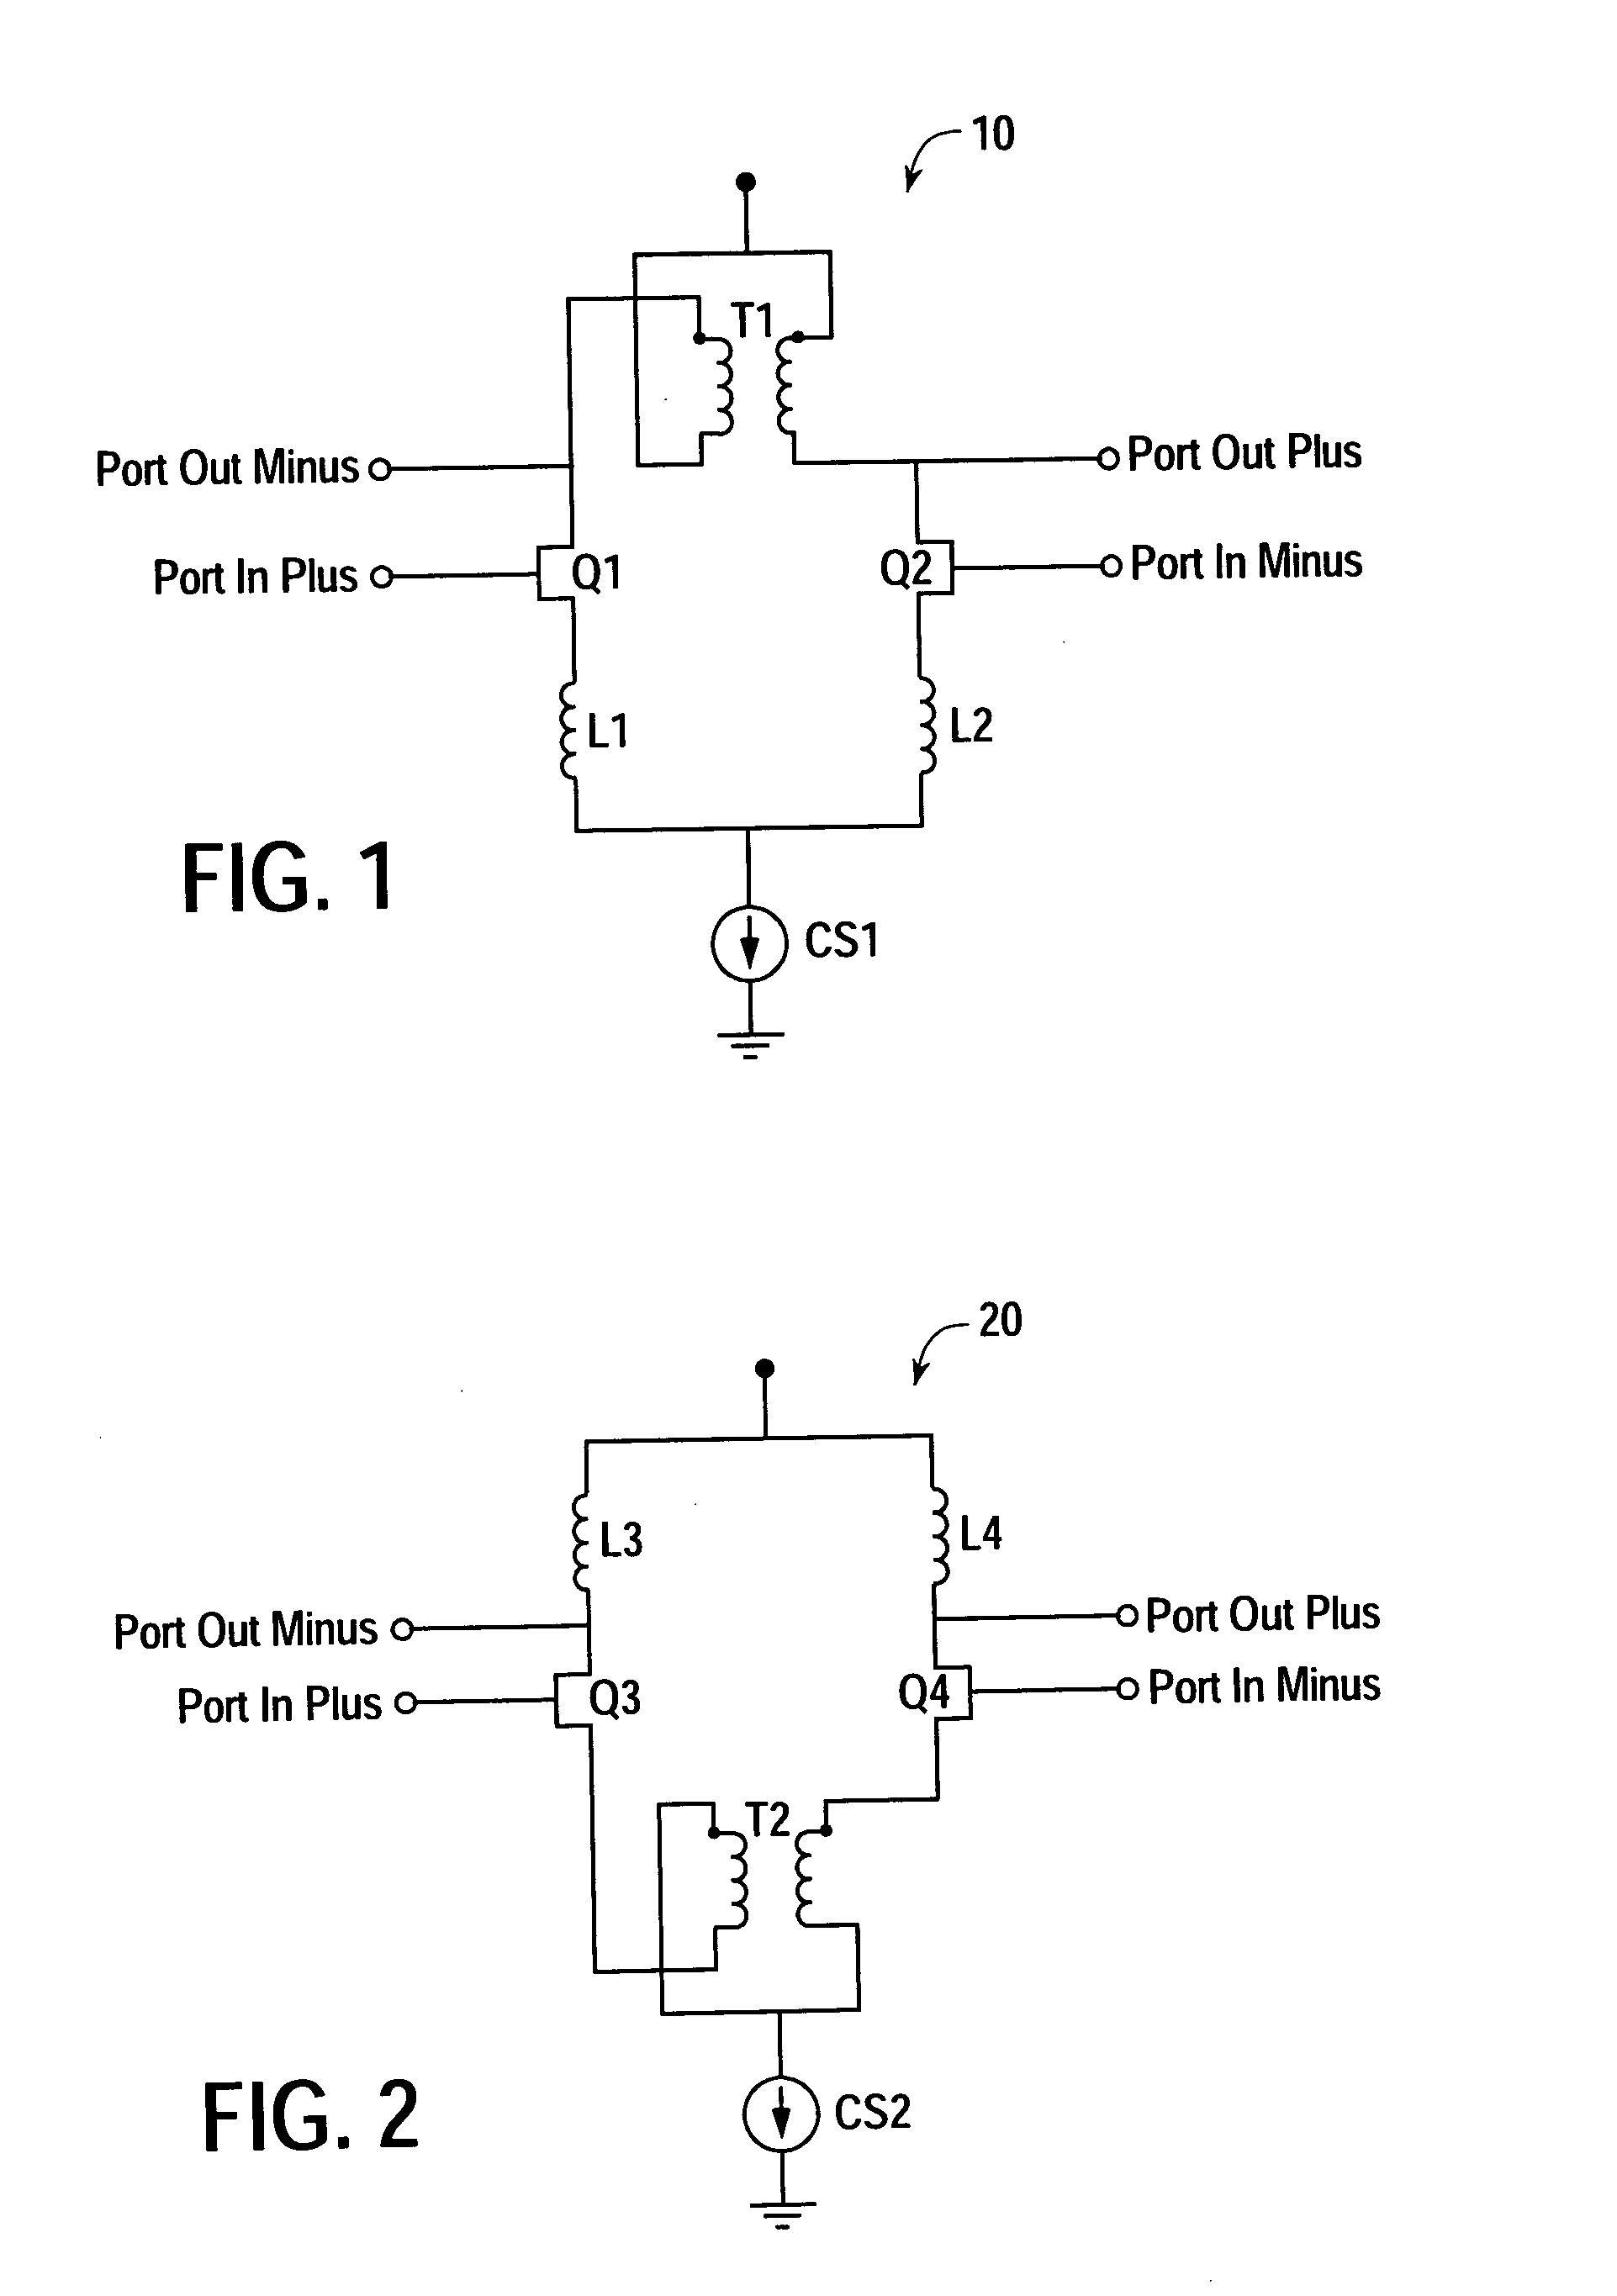 Coupled-inductance differential amplifier